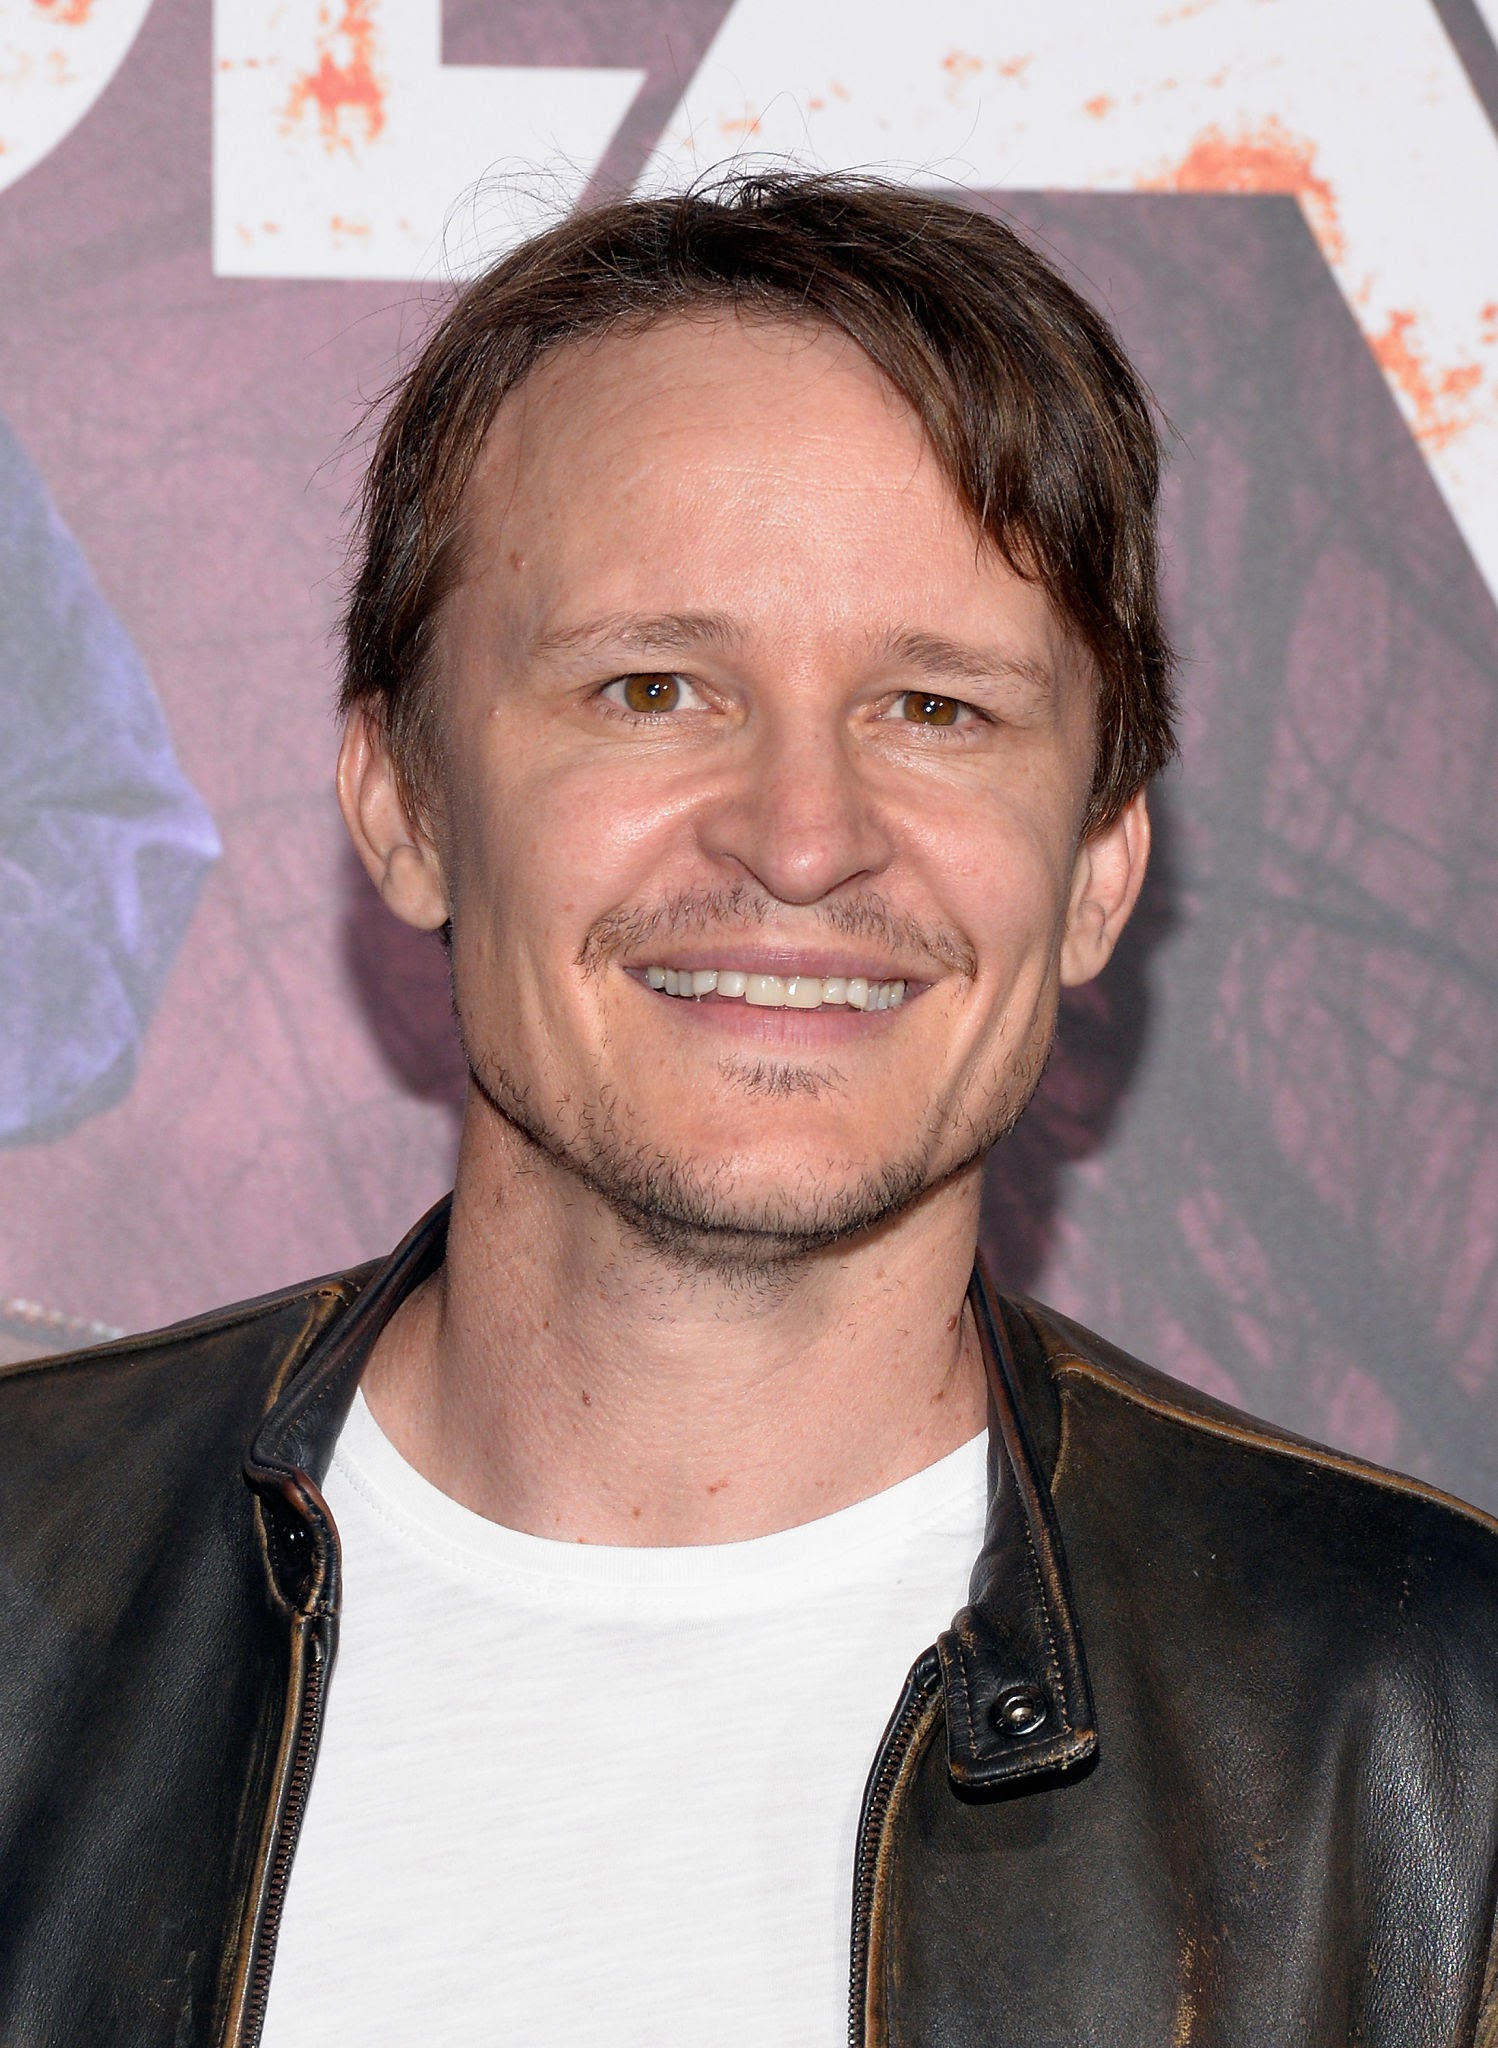 Damon Herriman (Actor) Wiki, Biography, Age, Girlfriends, Family, Facts and More